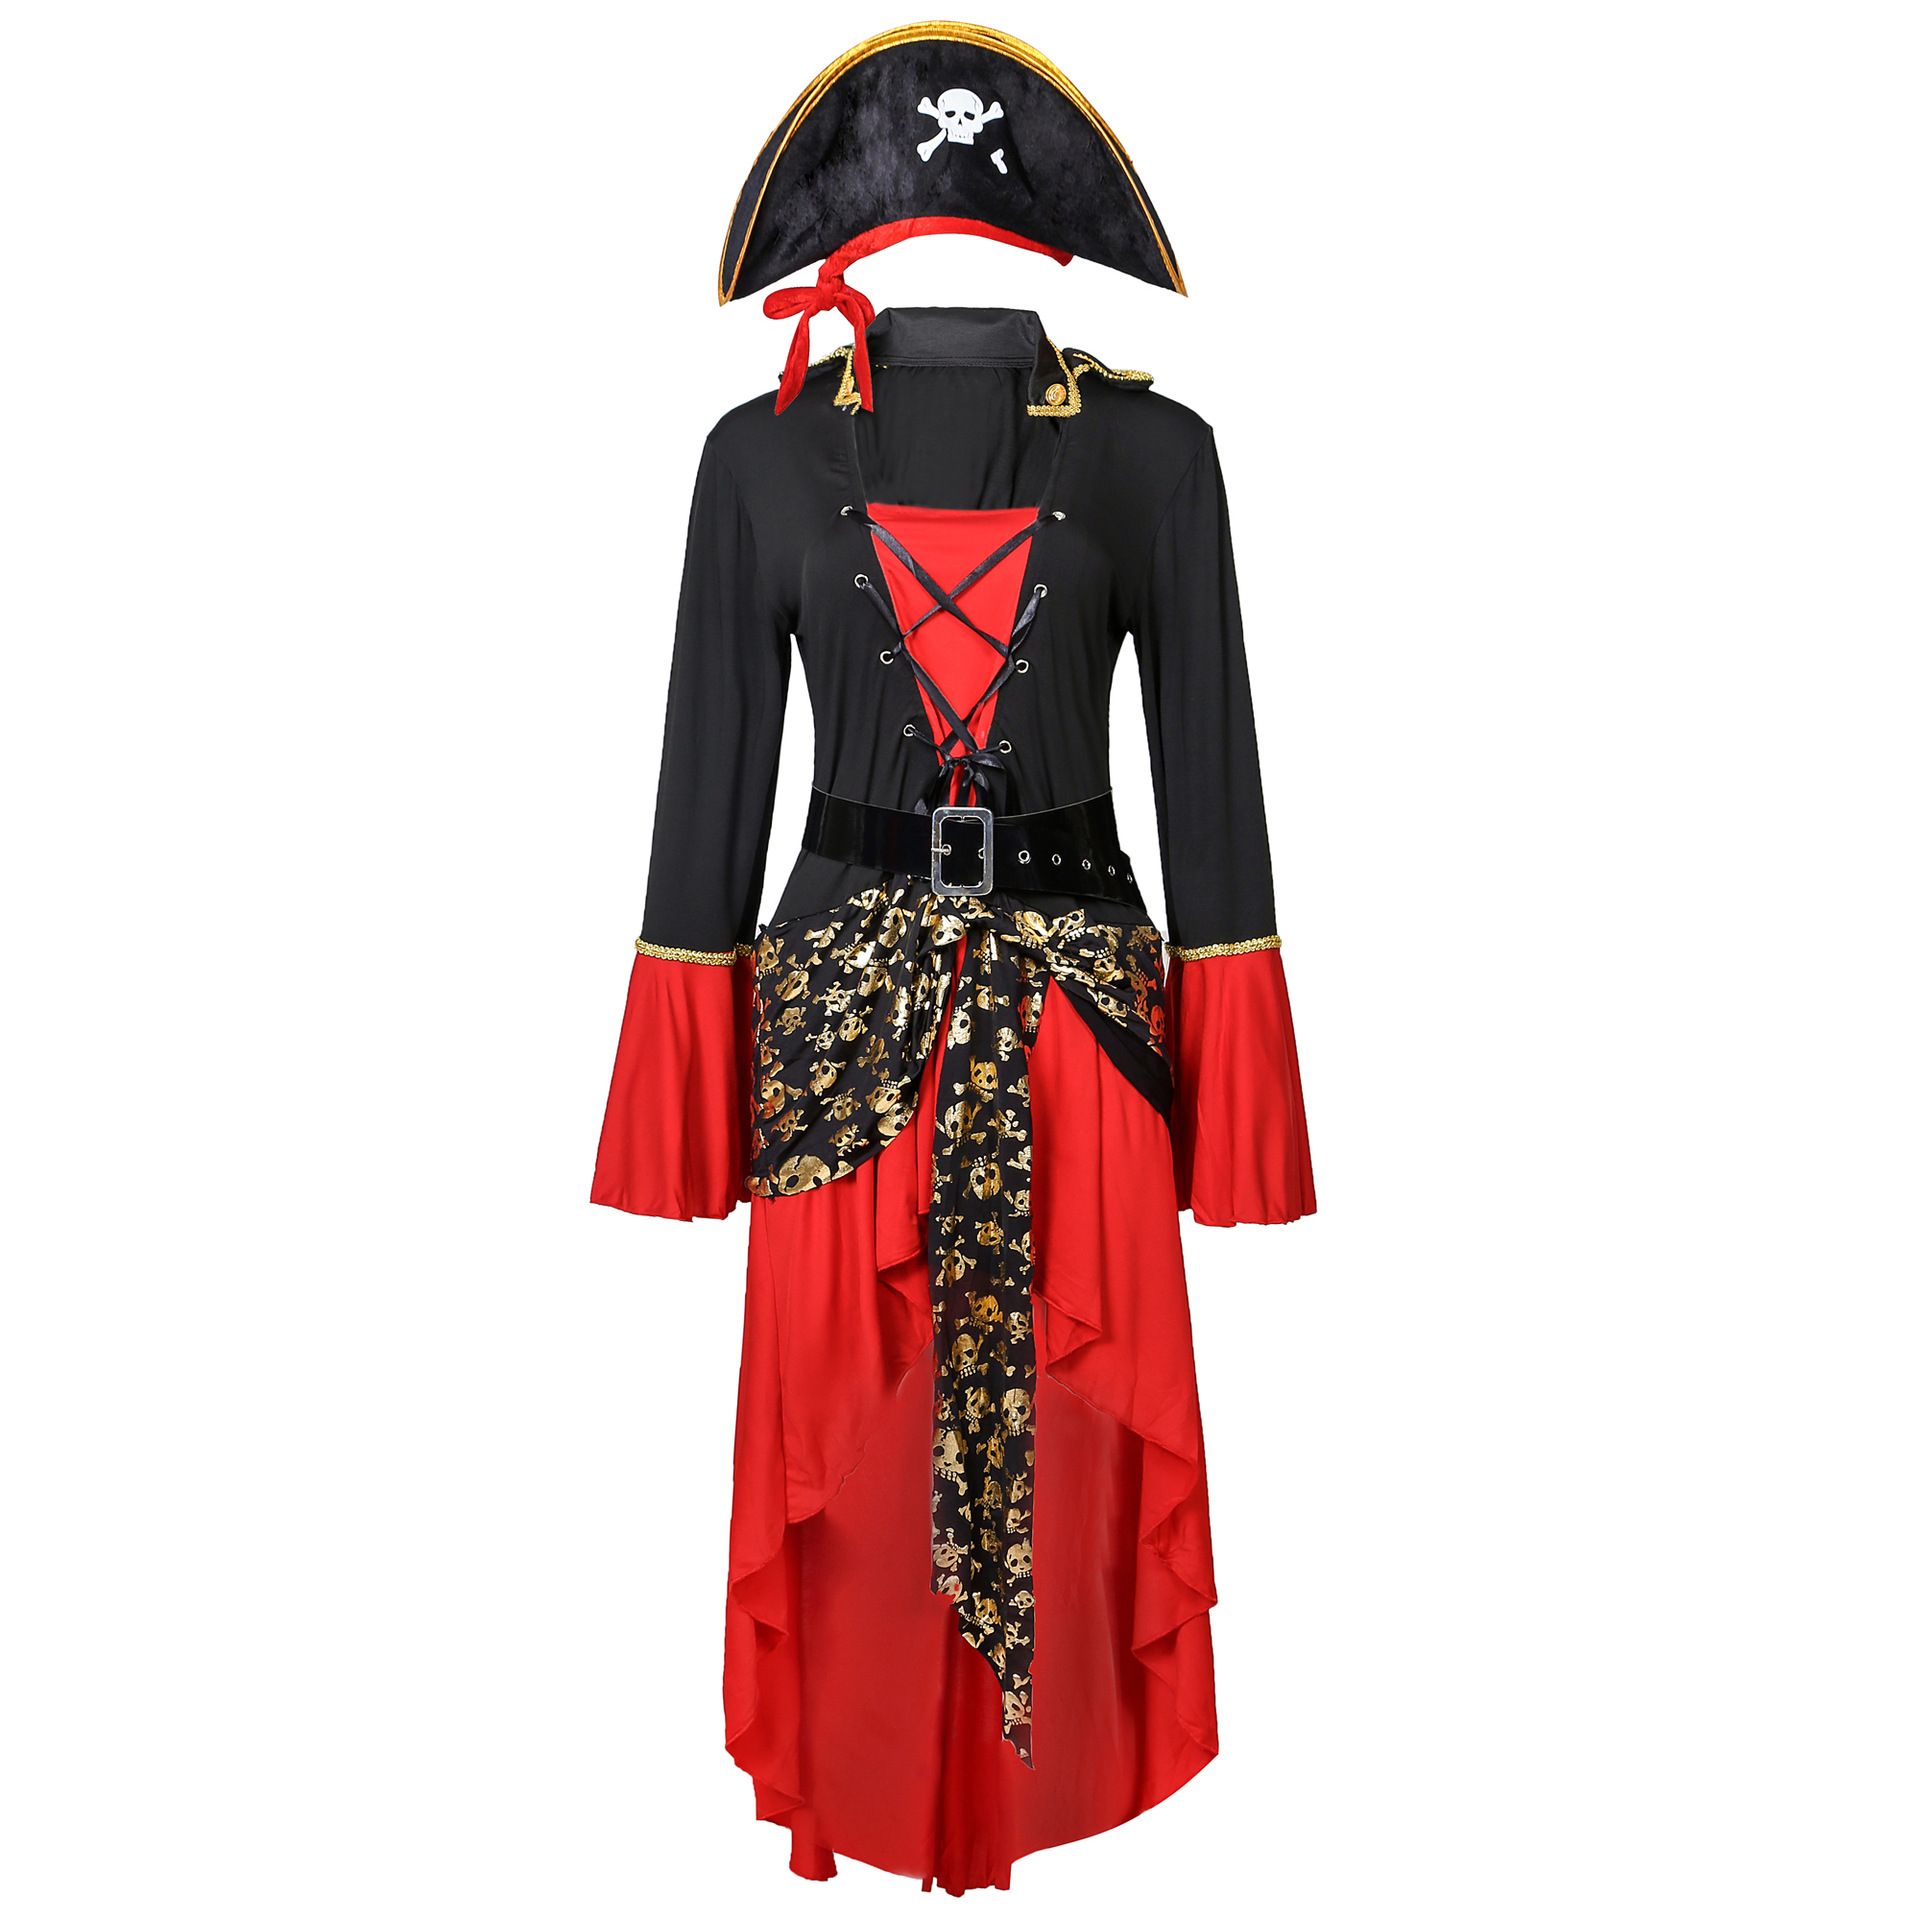 DIY Large Size European And American Sexy Female Pirate Costume Cosplay From Diyclothing, $933.97 DHgate photo